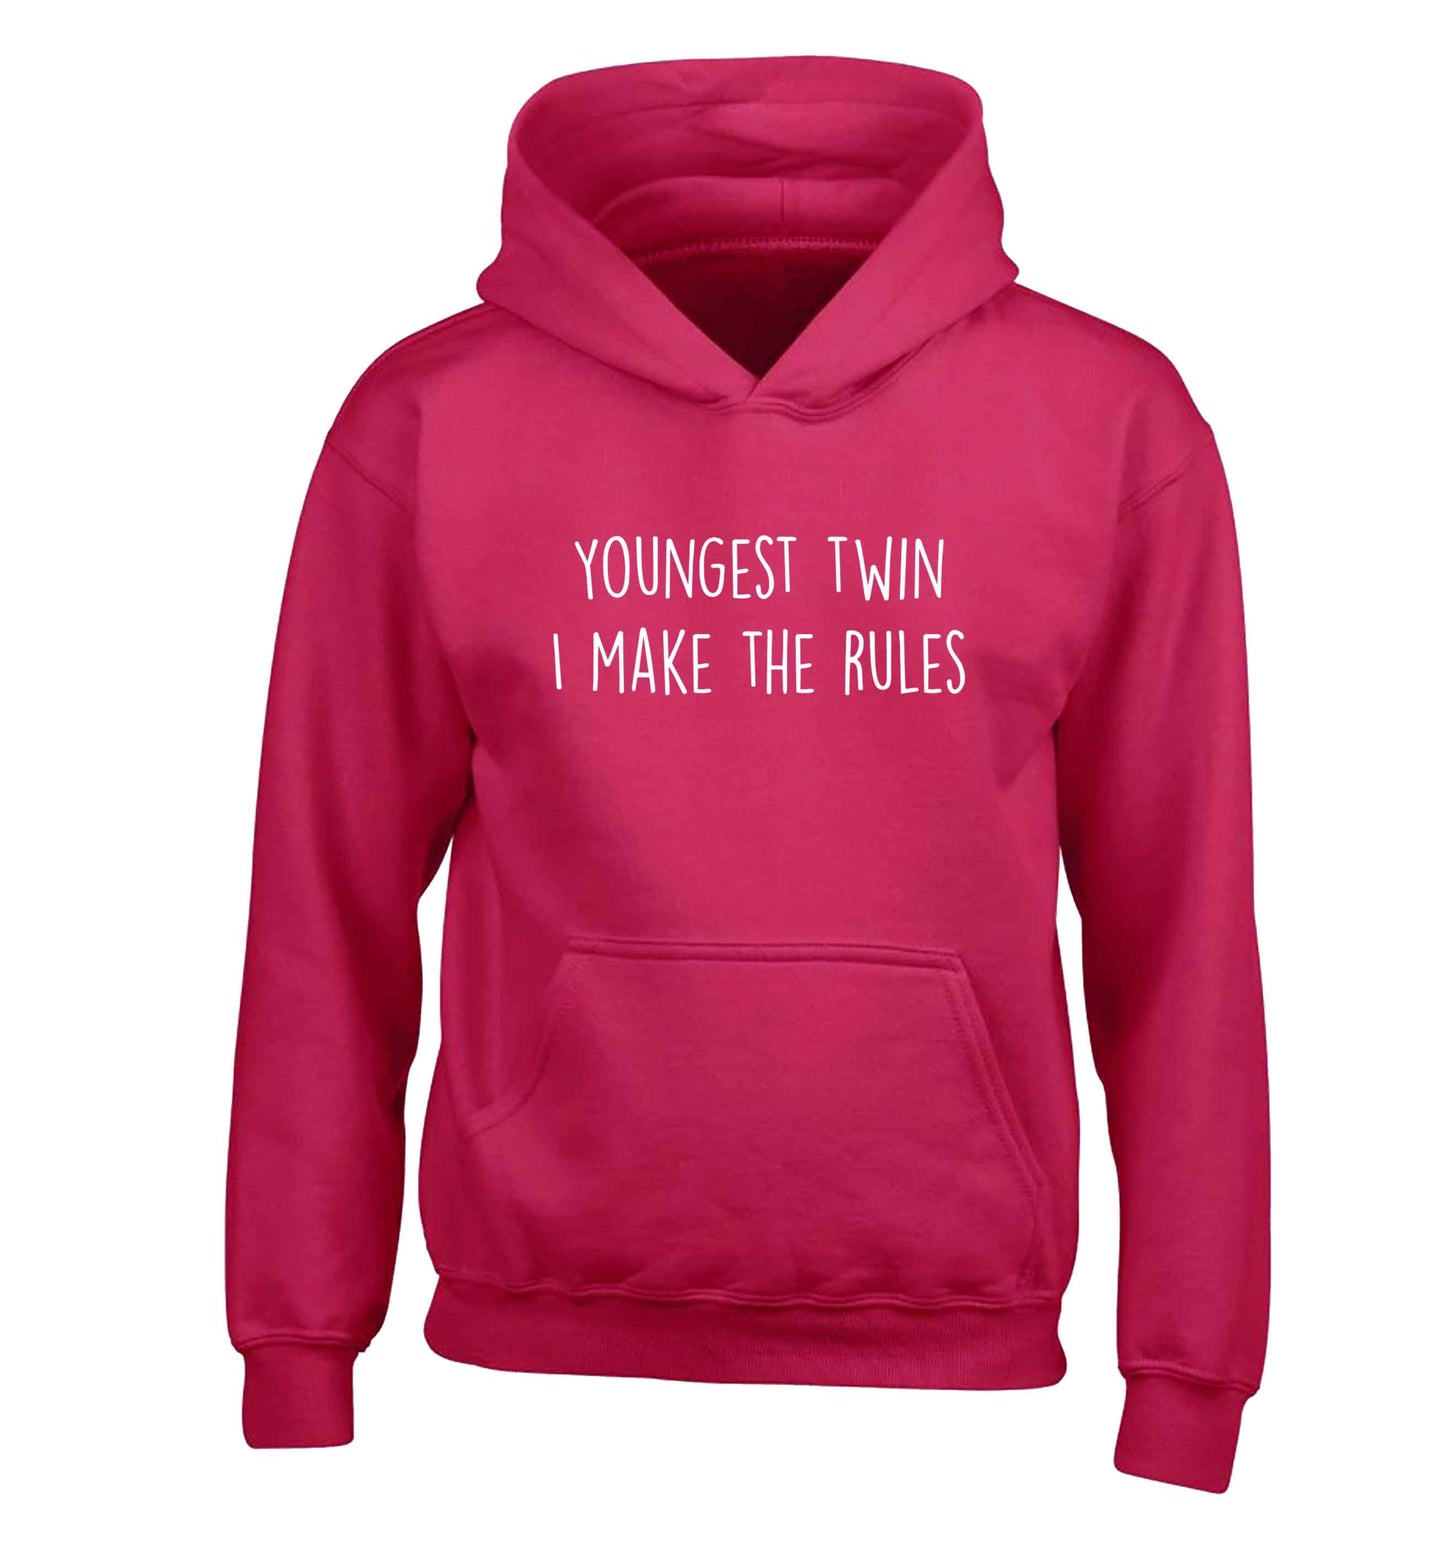 Youngest twin I make the rules children's pink hoodie 12-13 Years